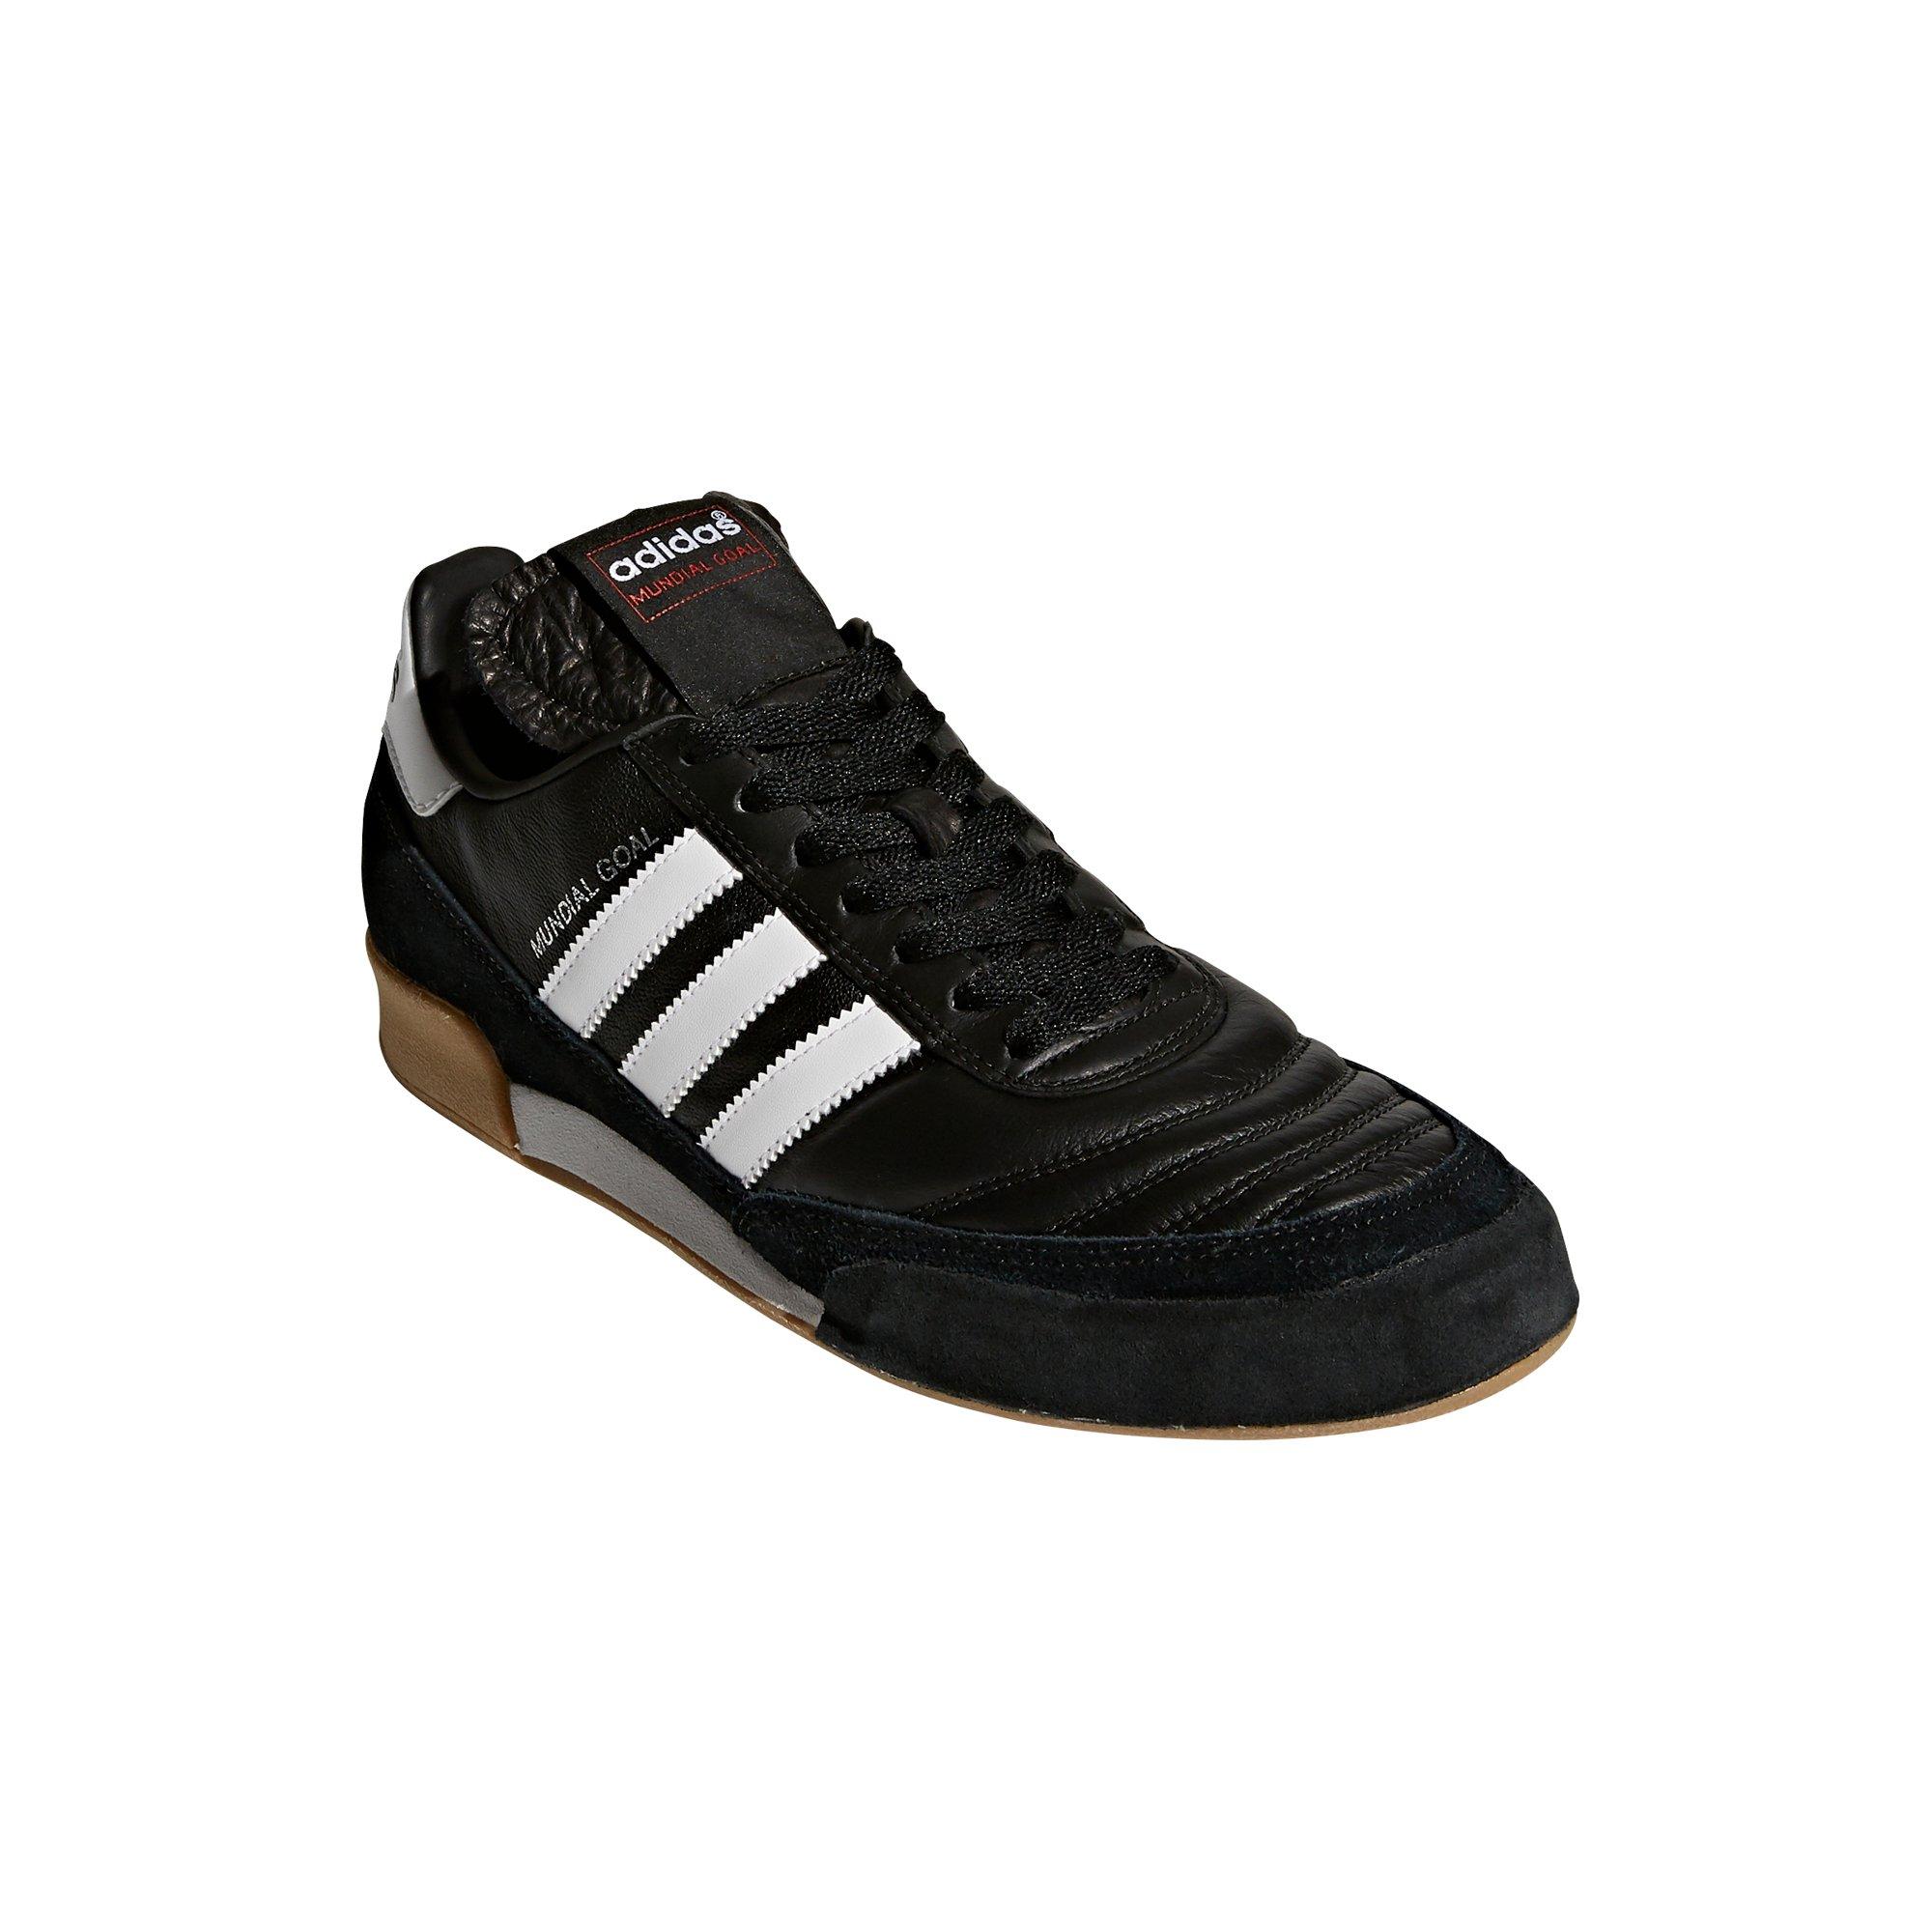 adidas mundial indoor soccer shoes